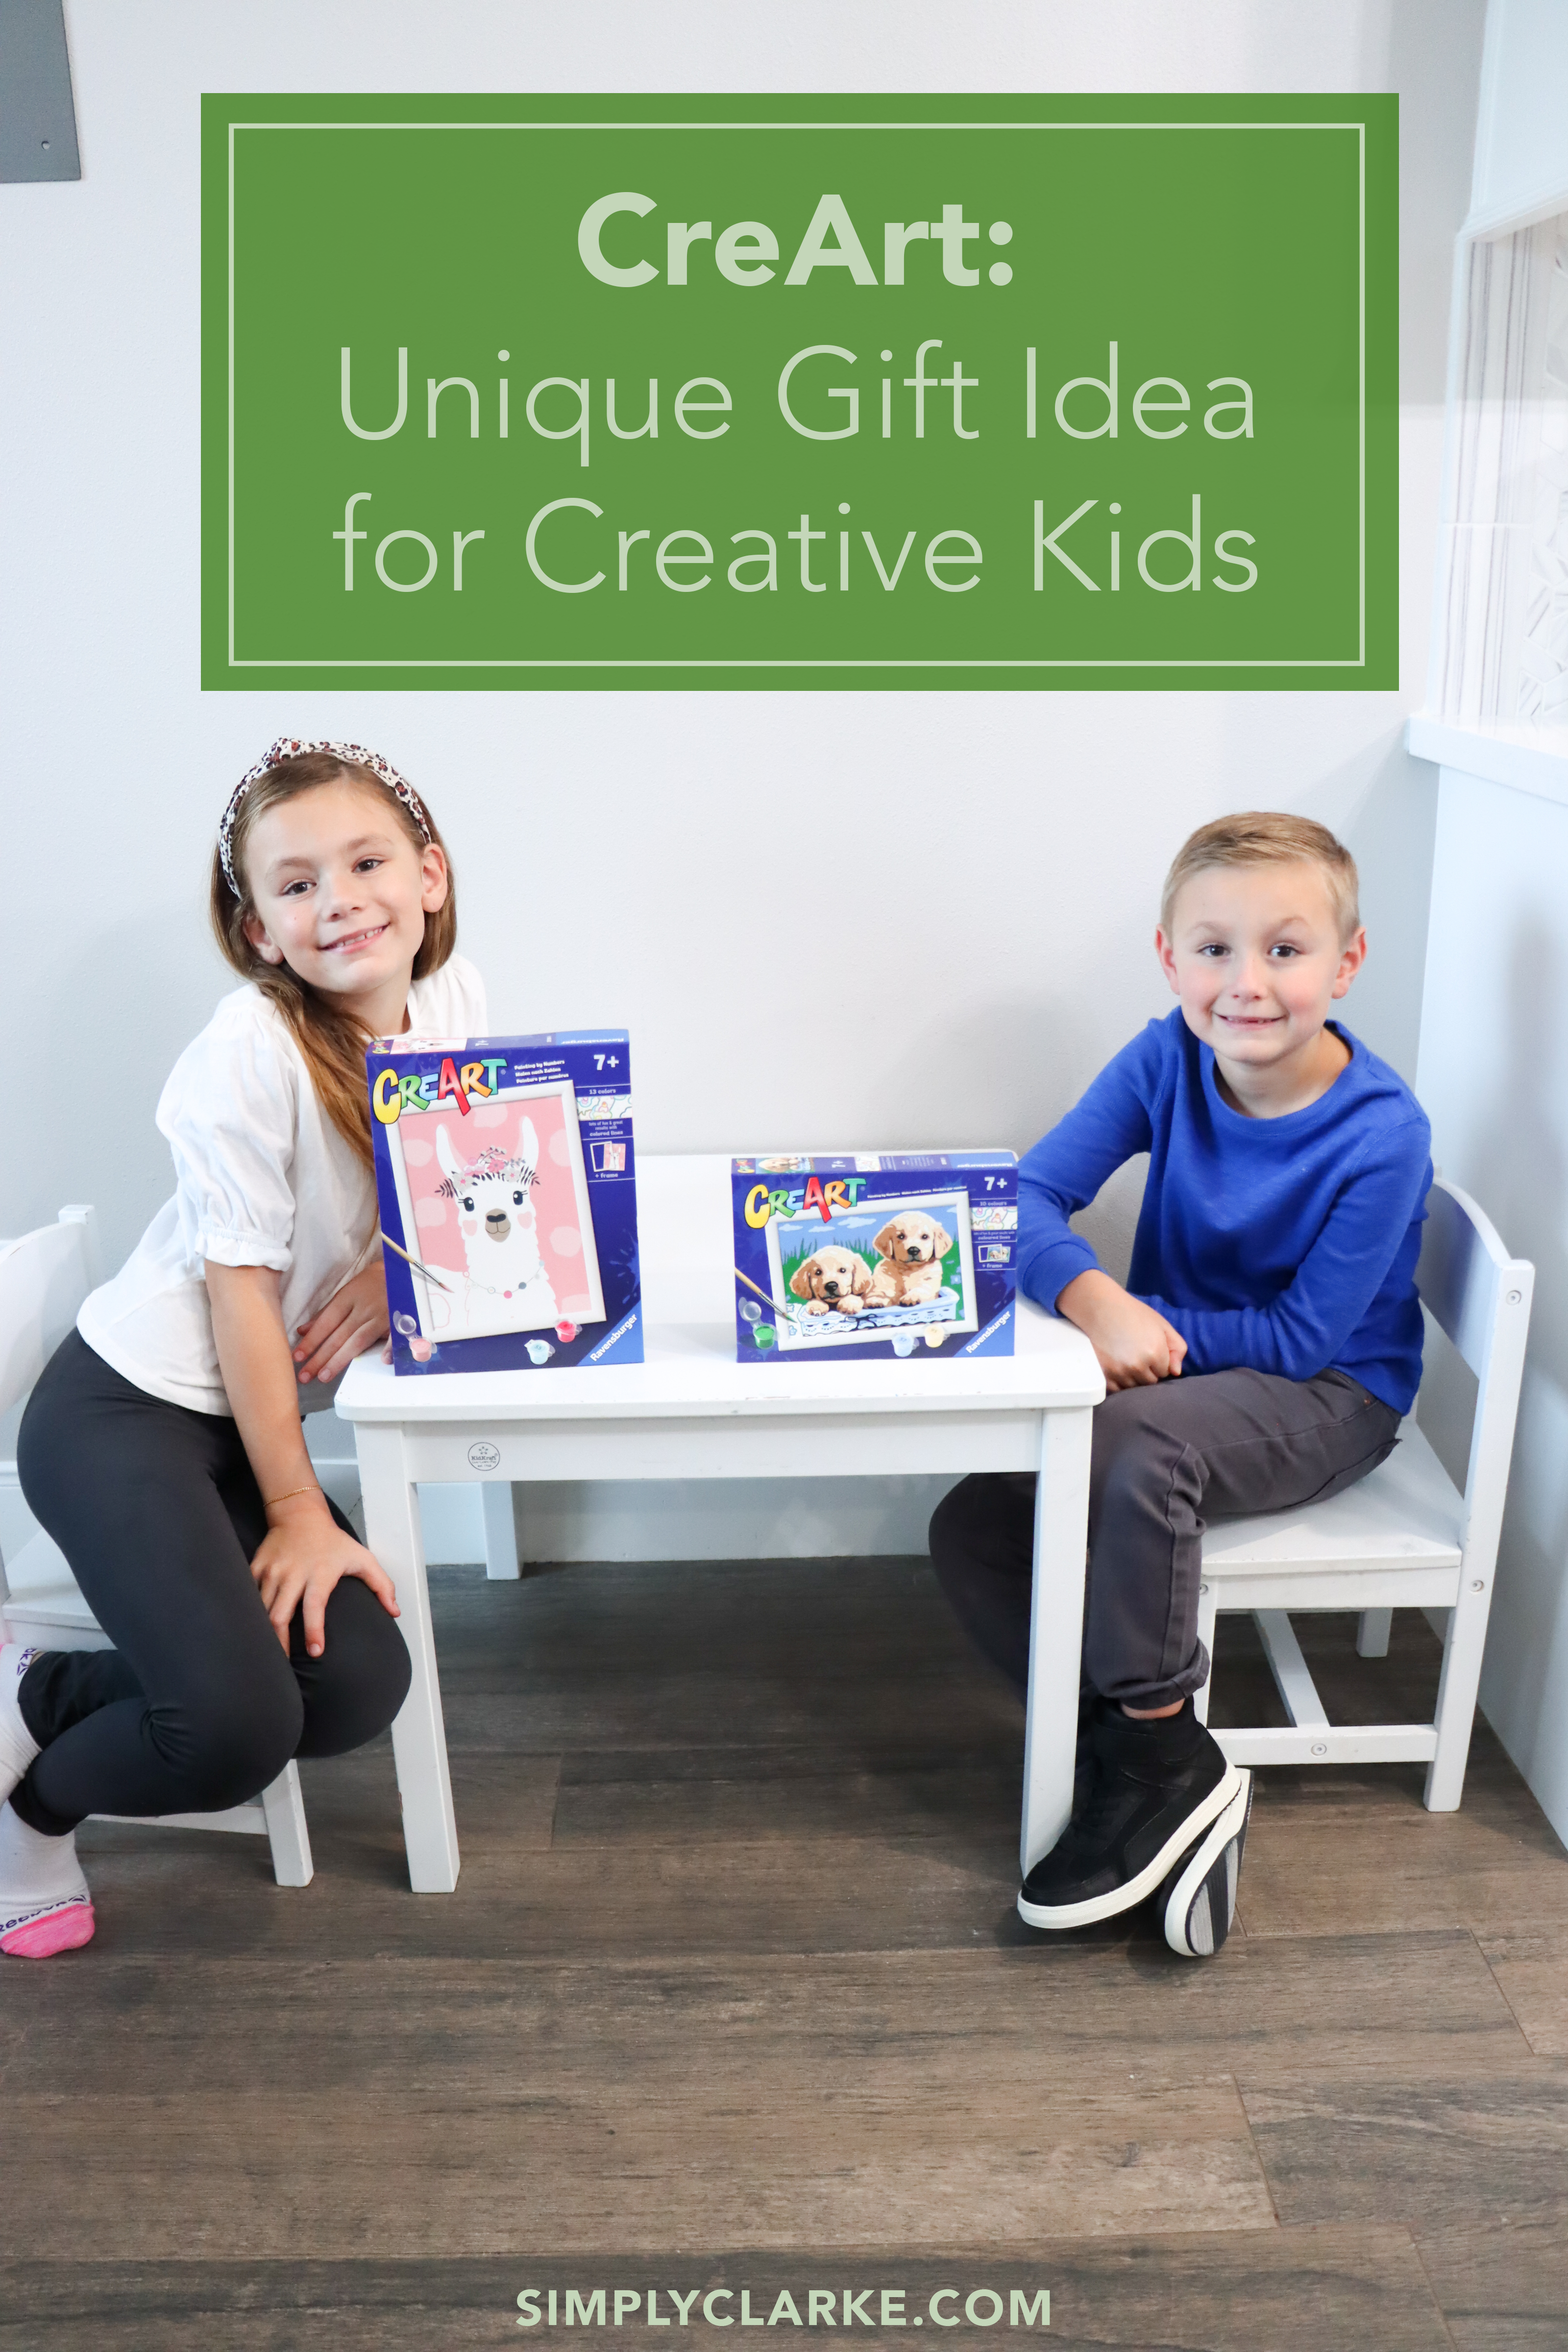 10 Easy and Creative Christmas Gifts Teachers Will Love - Houston Mommy and  Lifestyle Blogger